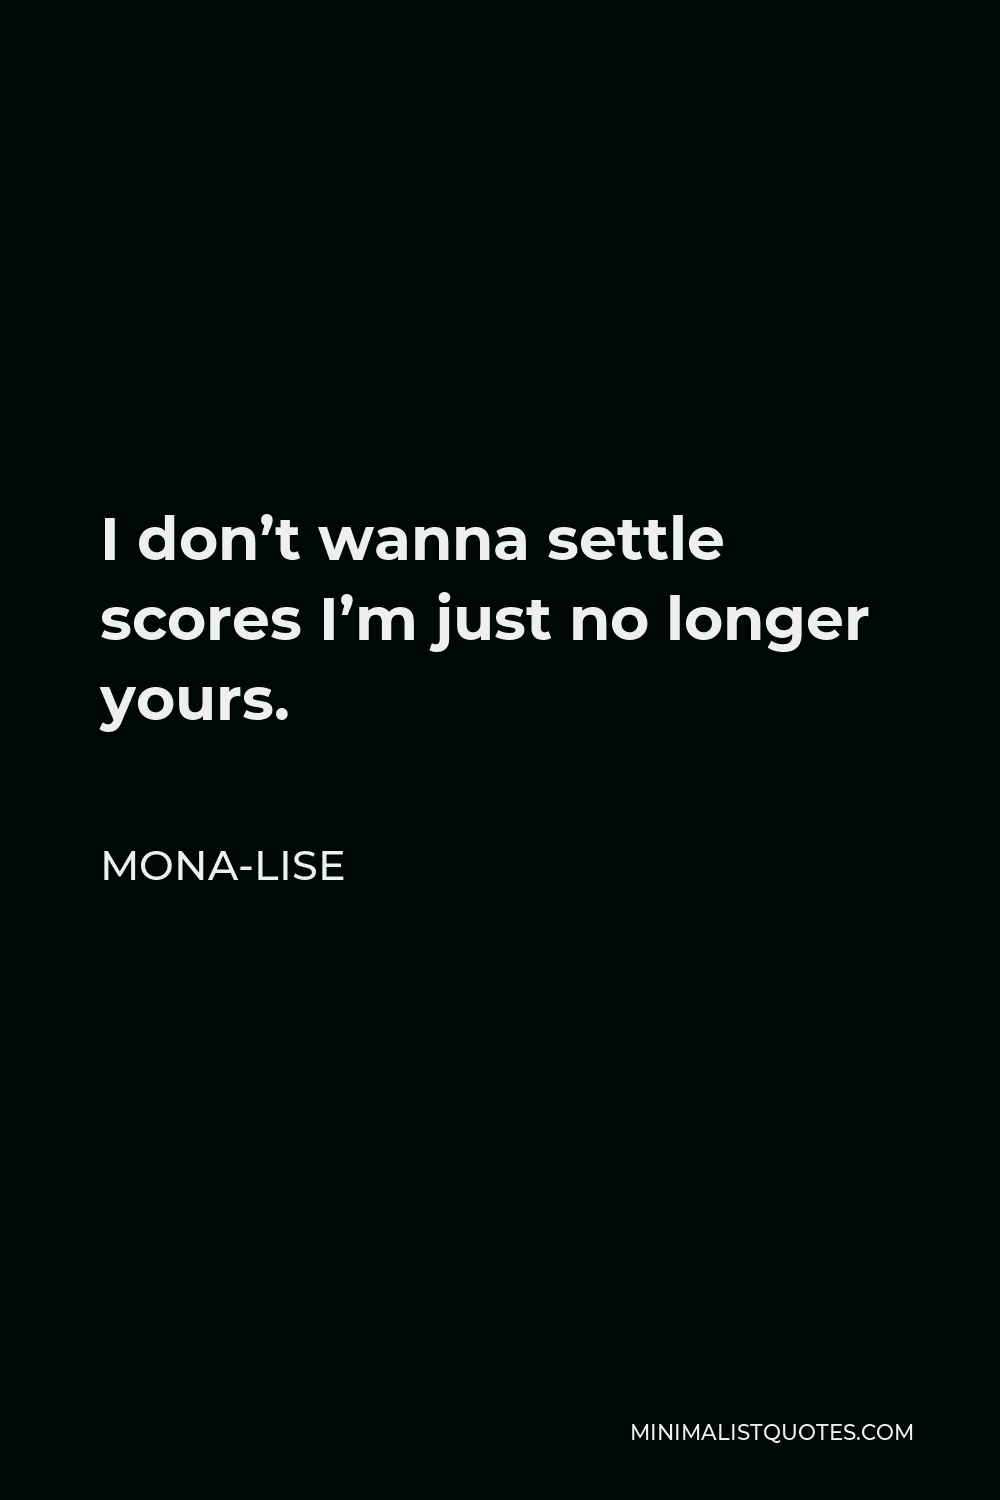 Mona-Lise Quote - I don’t wanna settle scores I’m just no longer yours.